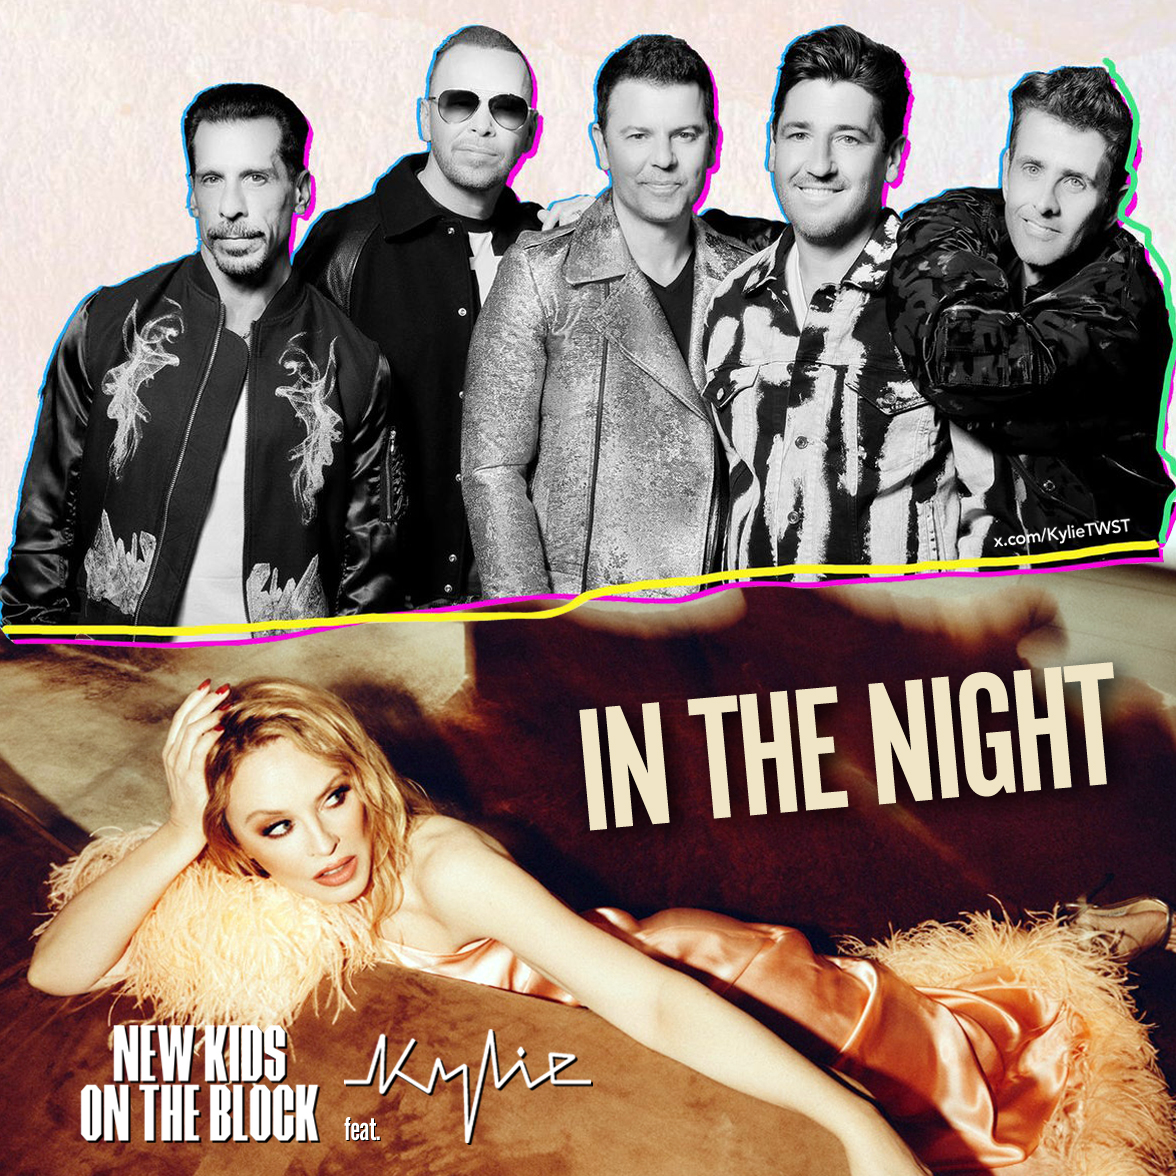 Donnie Wahlberg confirms the duet NKOTB feat. @kylieminogue 'In the Night'. — 'We were thinking of releasing it later as a surprise, but now somebody's leaked it. We wrote it, and sent her the song. She had it for one day, and sent it back with her vocals. She's fantastic.'